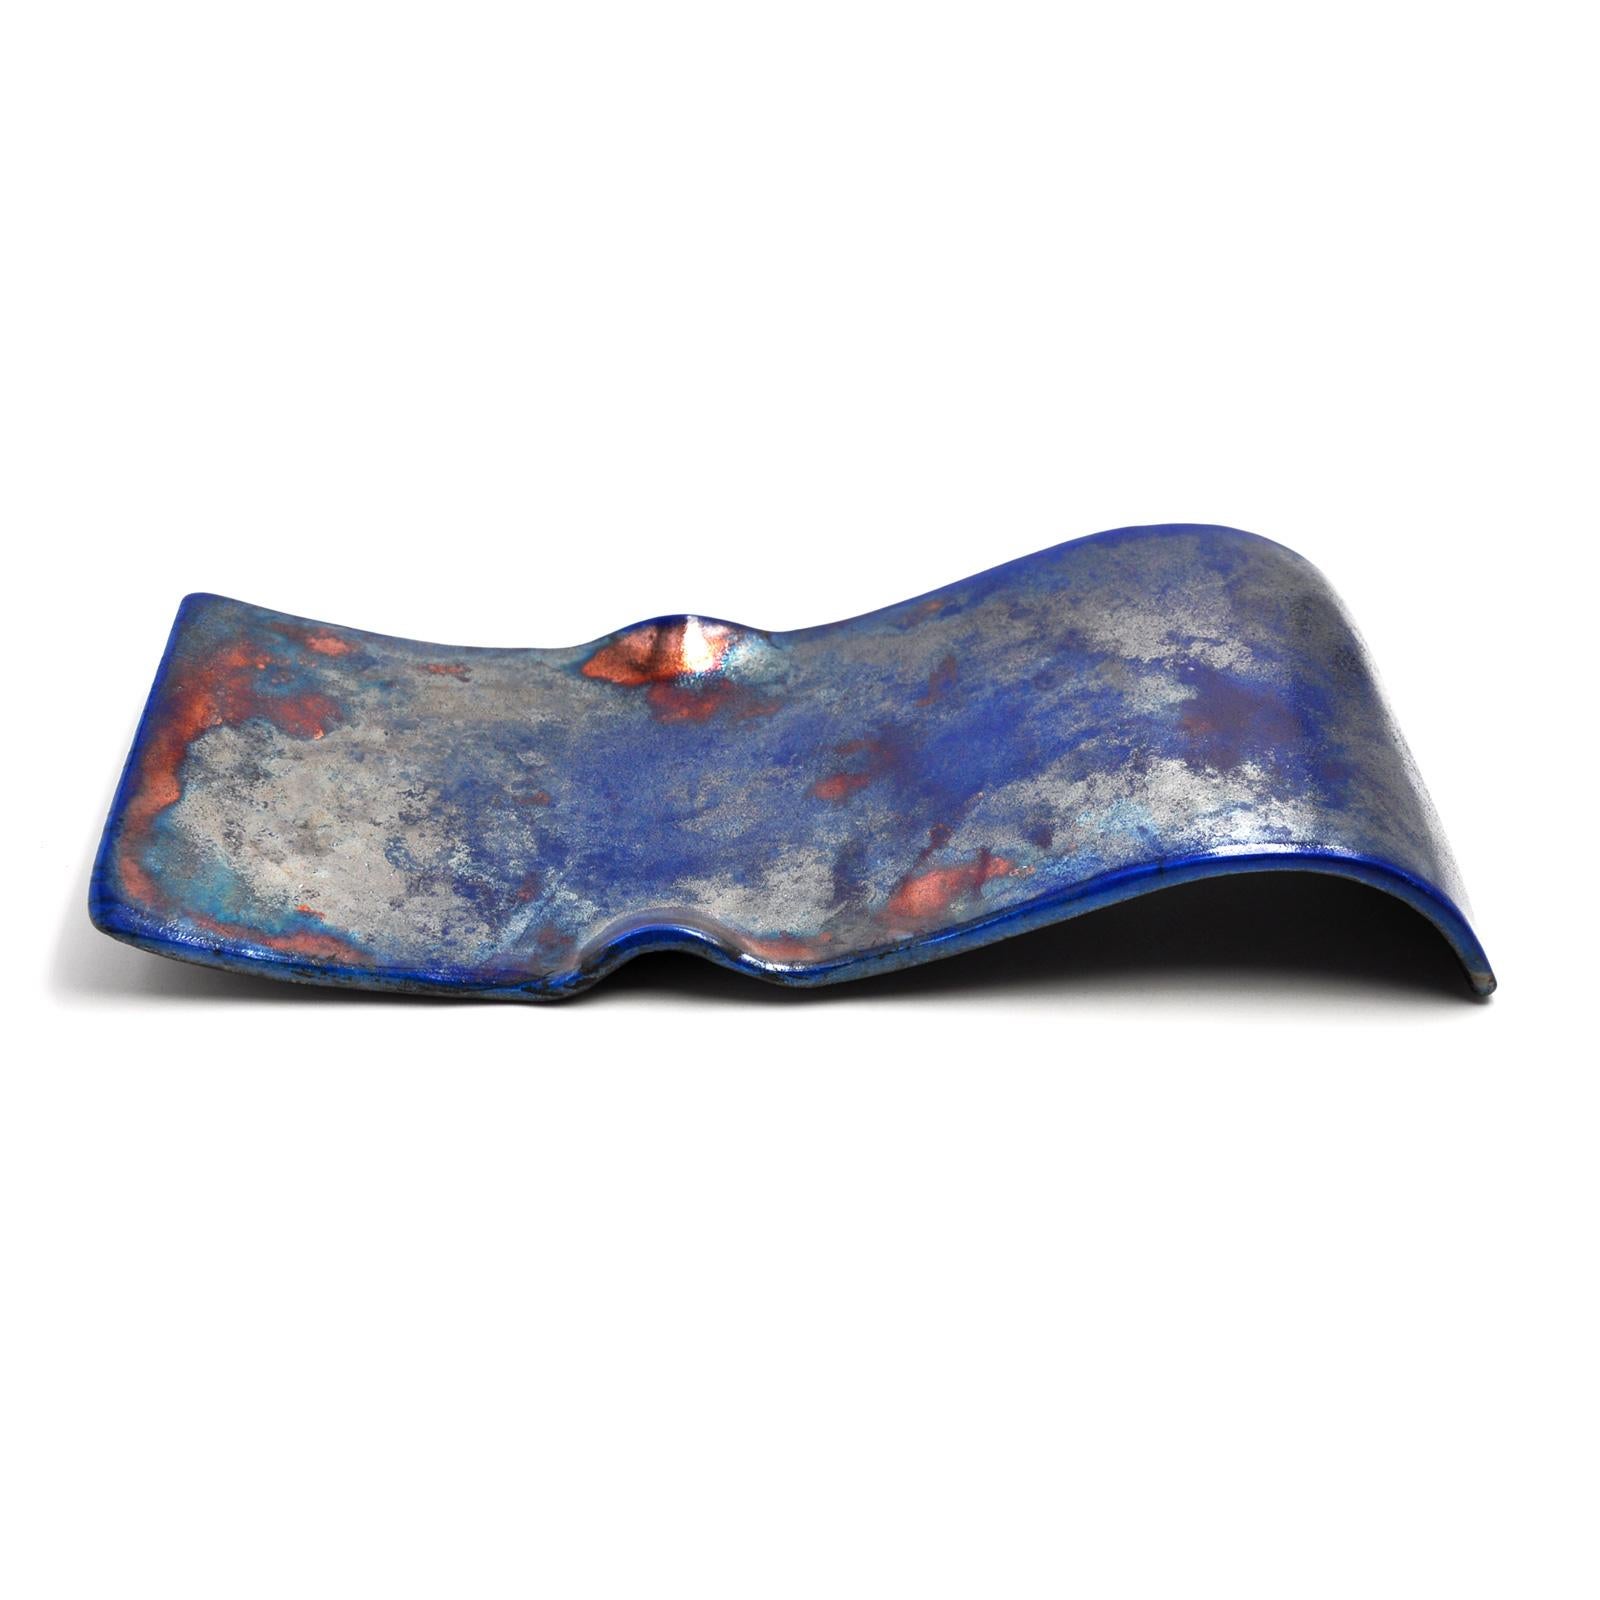 Modern, linear design and the warm  luster of the decoration, make  SILVER BLUE SMALL WAVE  a centerpiece of  strong personality.
Designed and  modeled entirely by hand by designer-artist Nino Basso, this elegant decorative plate  is made of raku